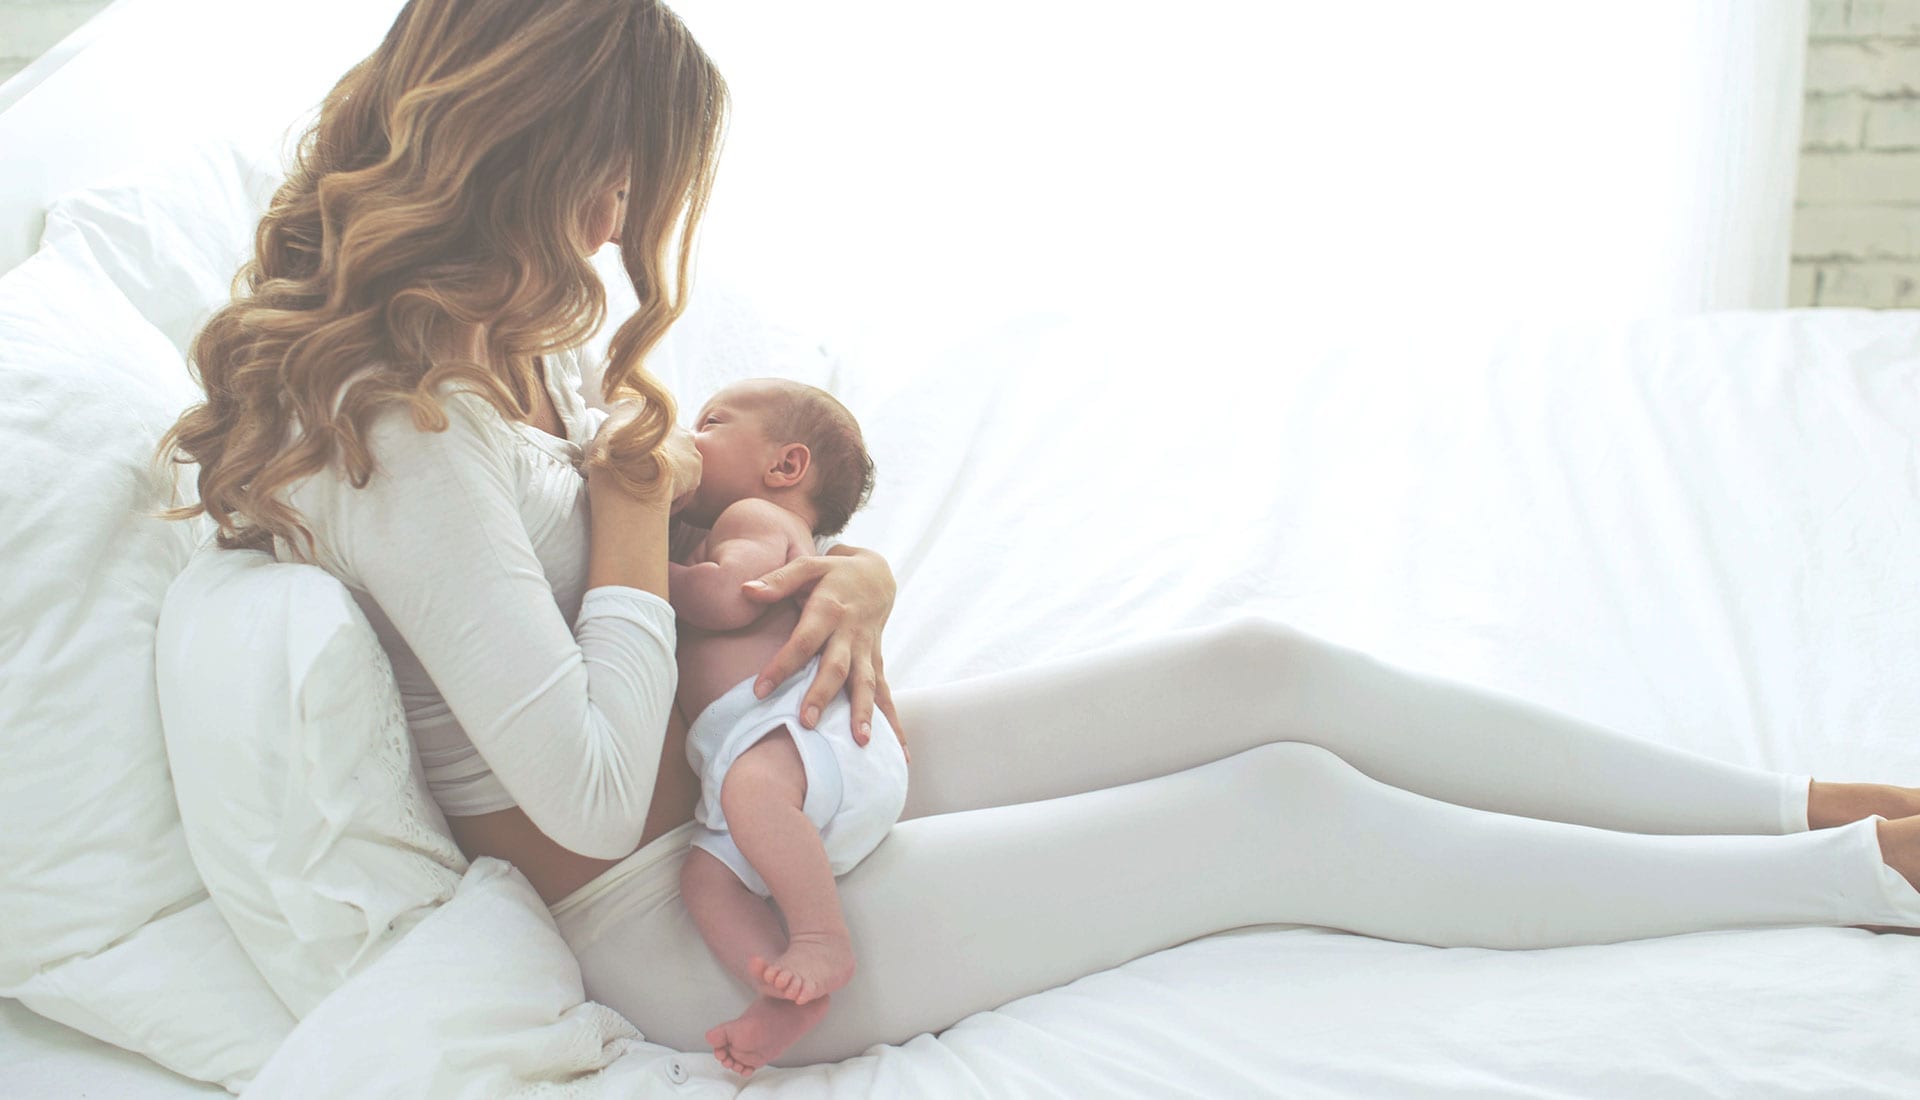 Breastfeeding Help Recognizing When You Need It And Where To Find It